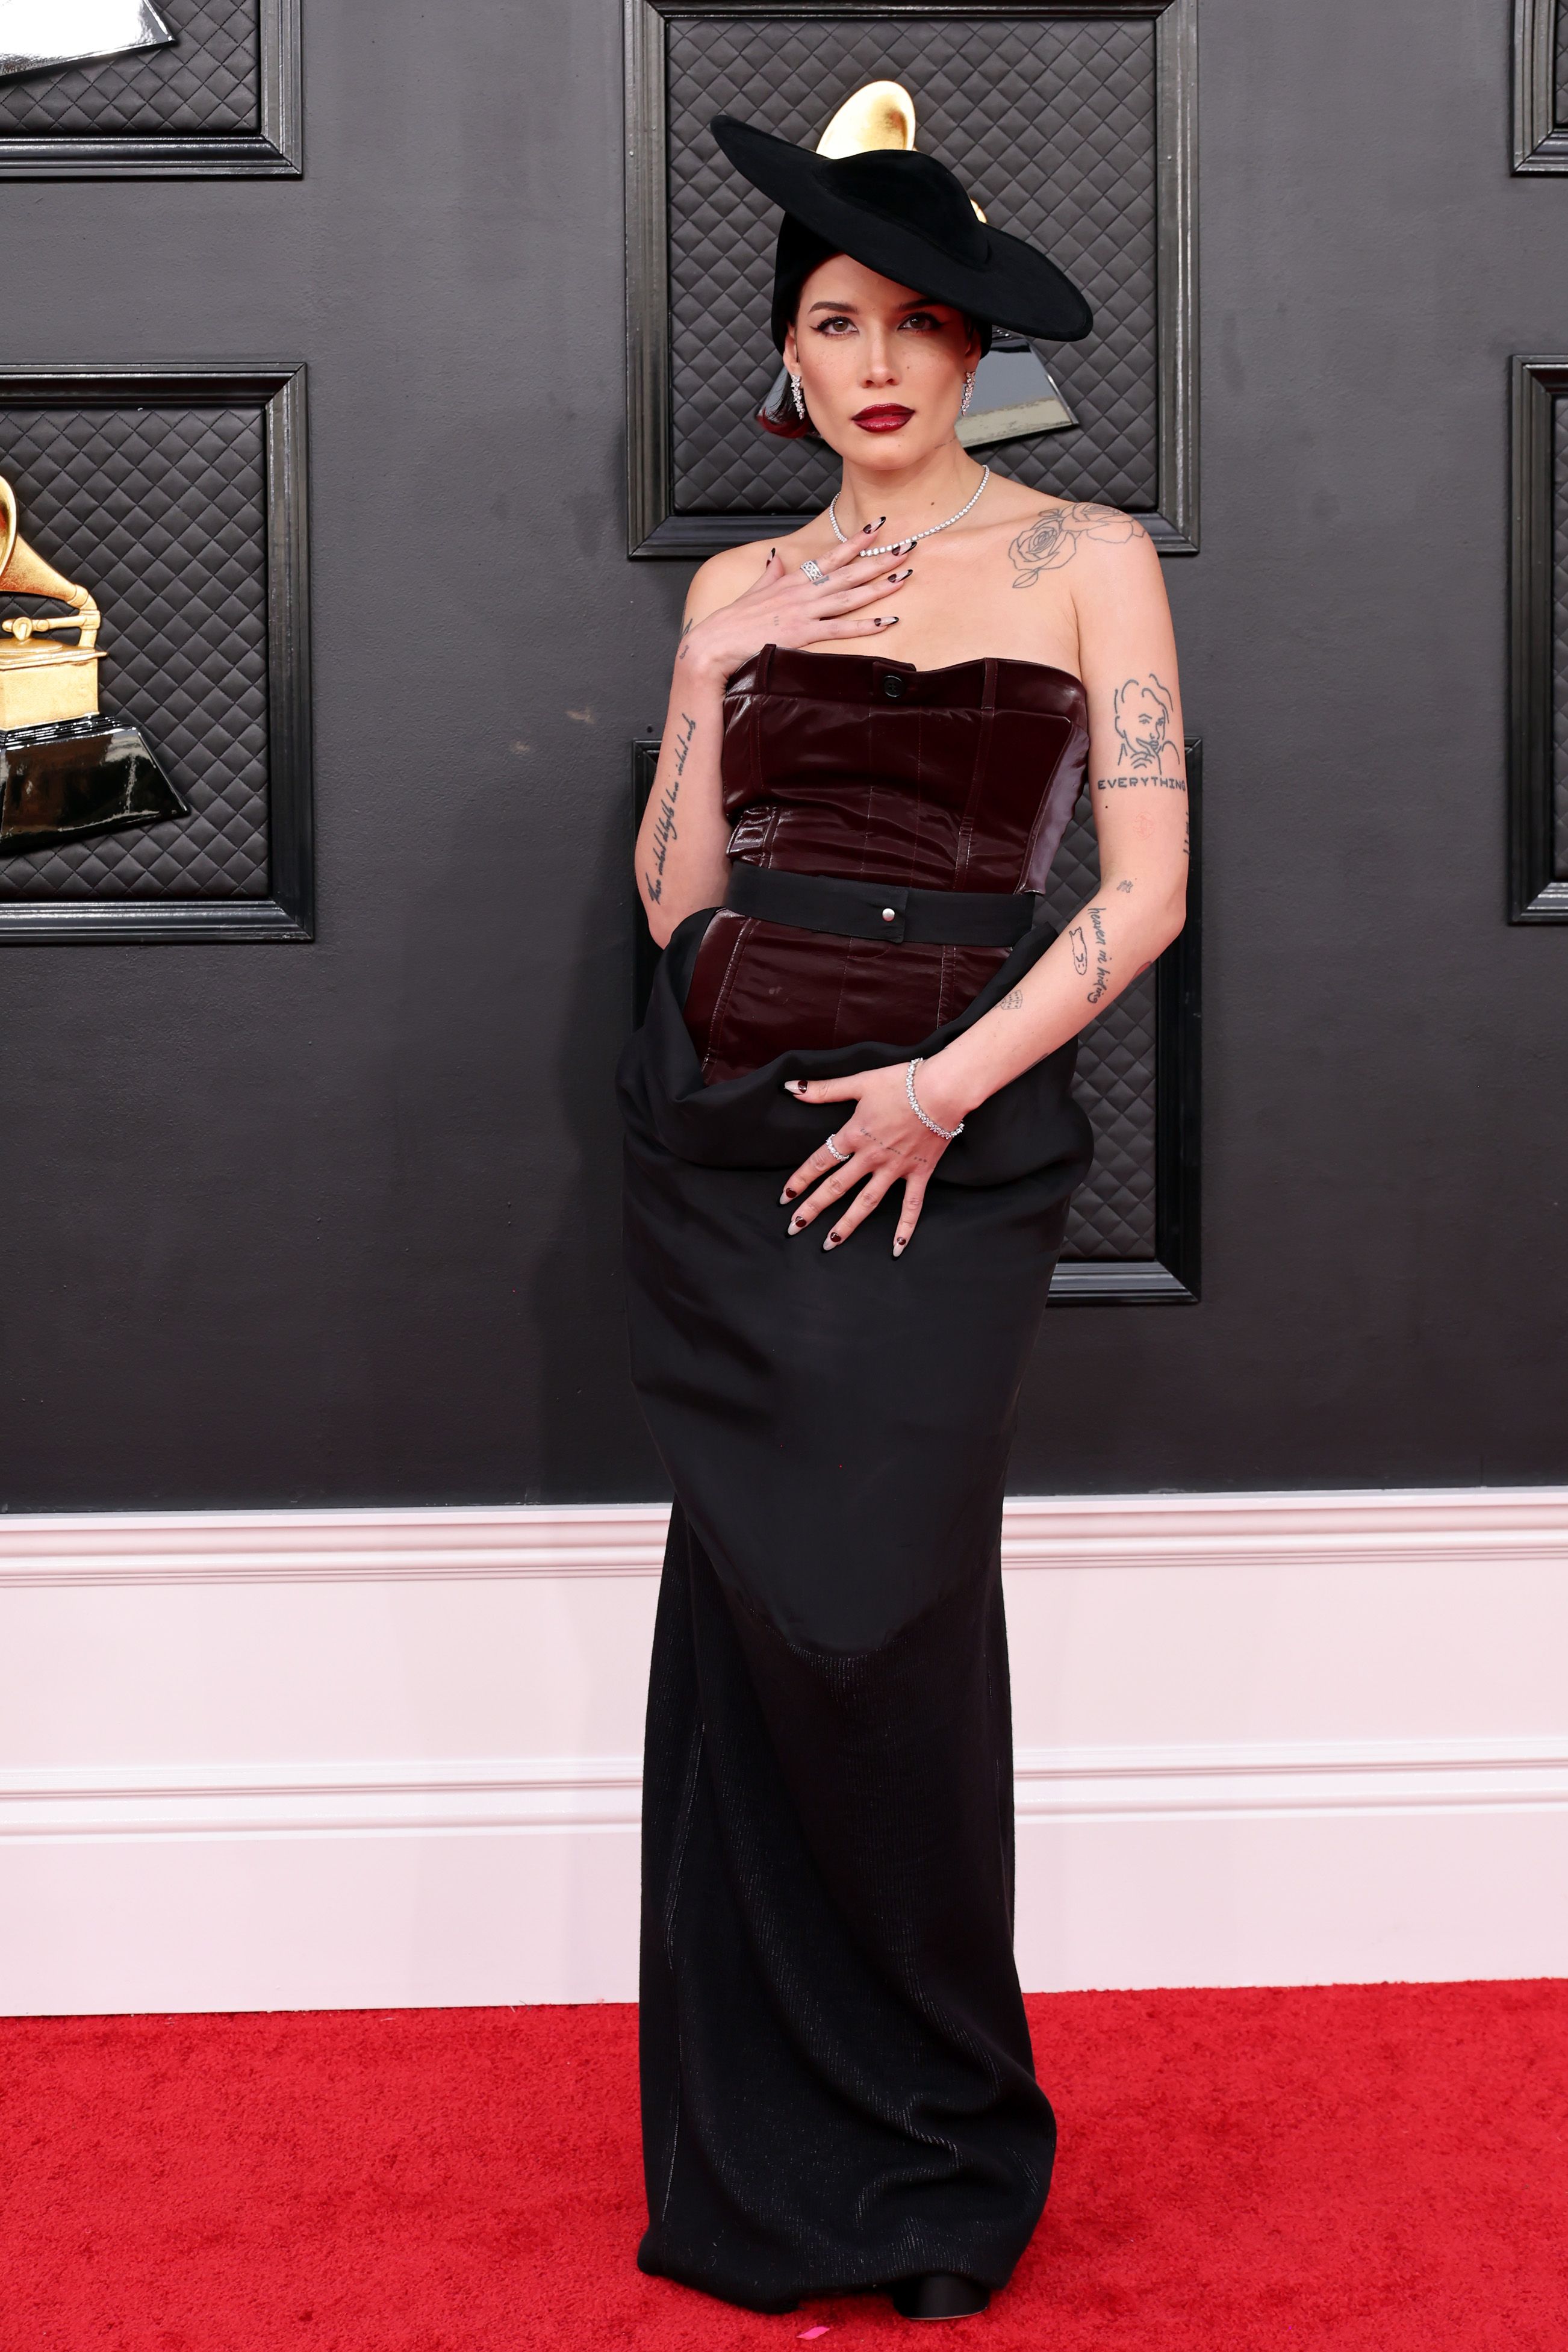 See the 27 Best- and Worst-Dressed Celebs at the 2022 Grammy Awards